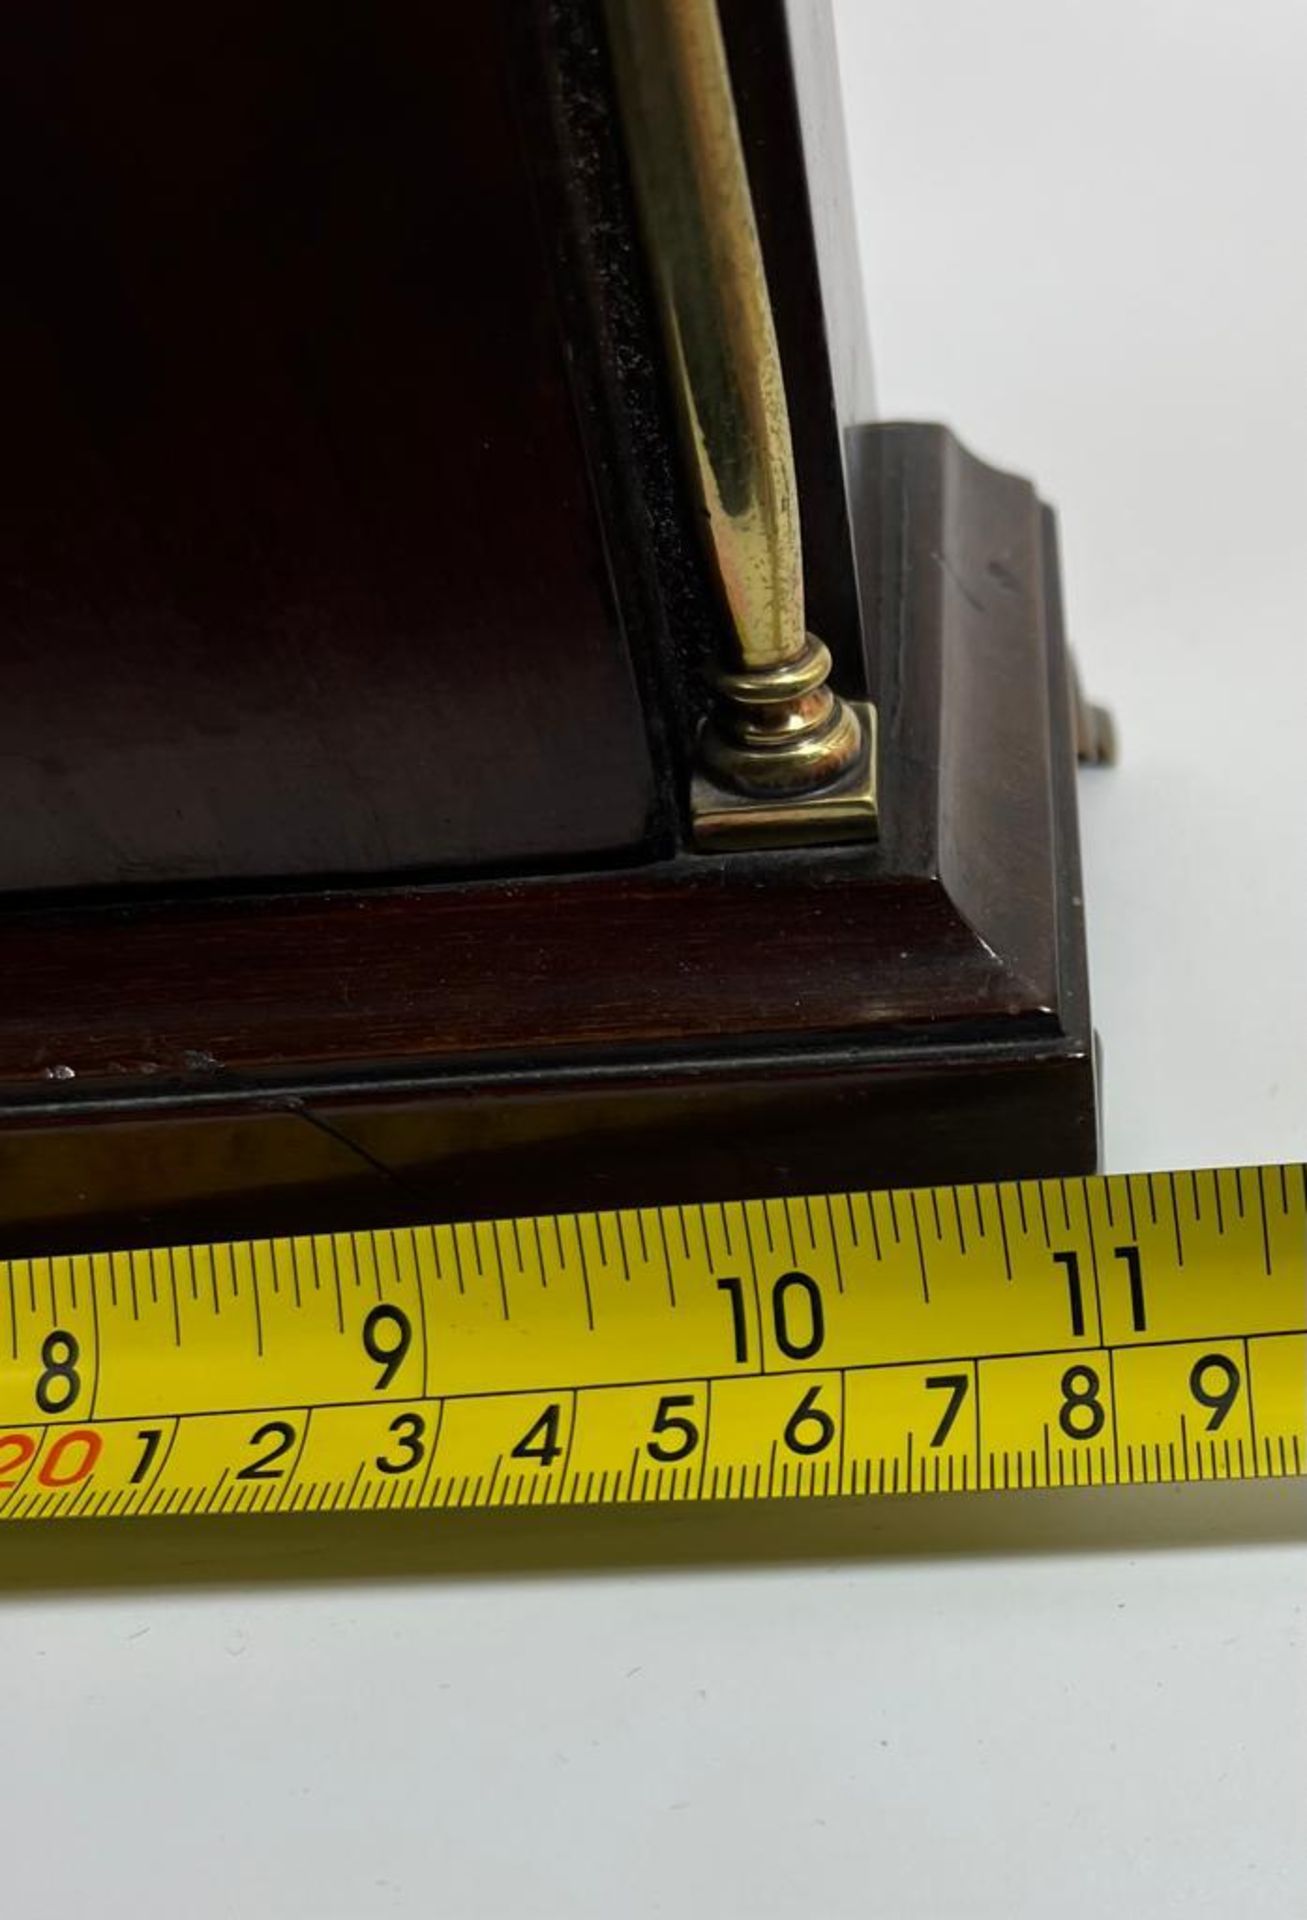 A MAHOGANY MANTLE CLOCK WITH BRASS COLUMNS AND FEET WITH JAPE FRERES MOVEMENT, 19 X 28 CM - Image 6 of 7